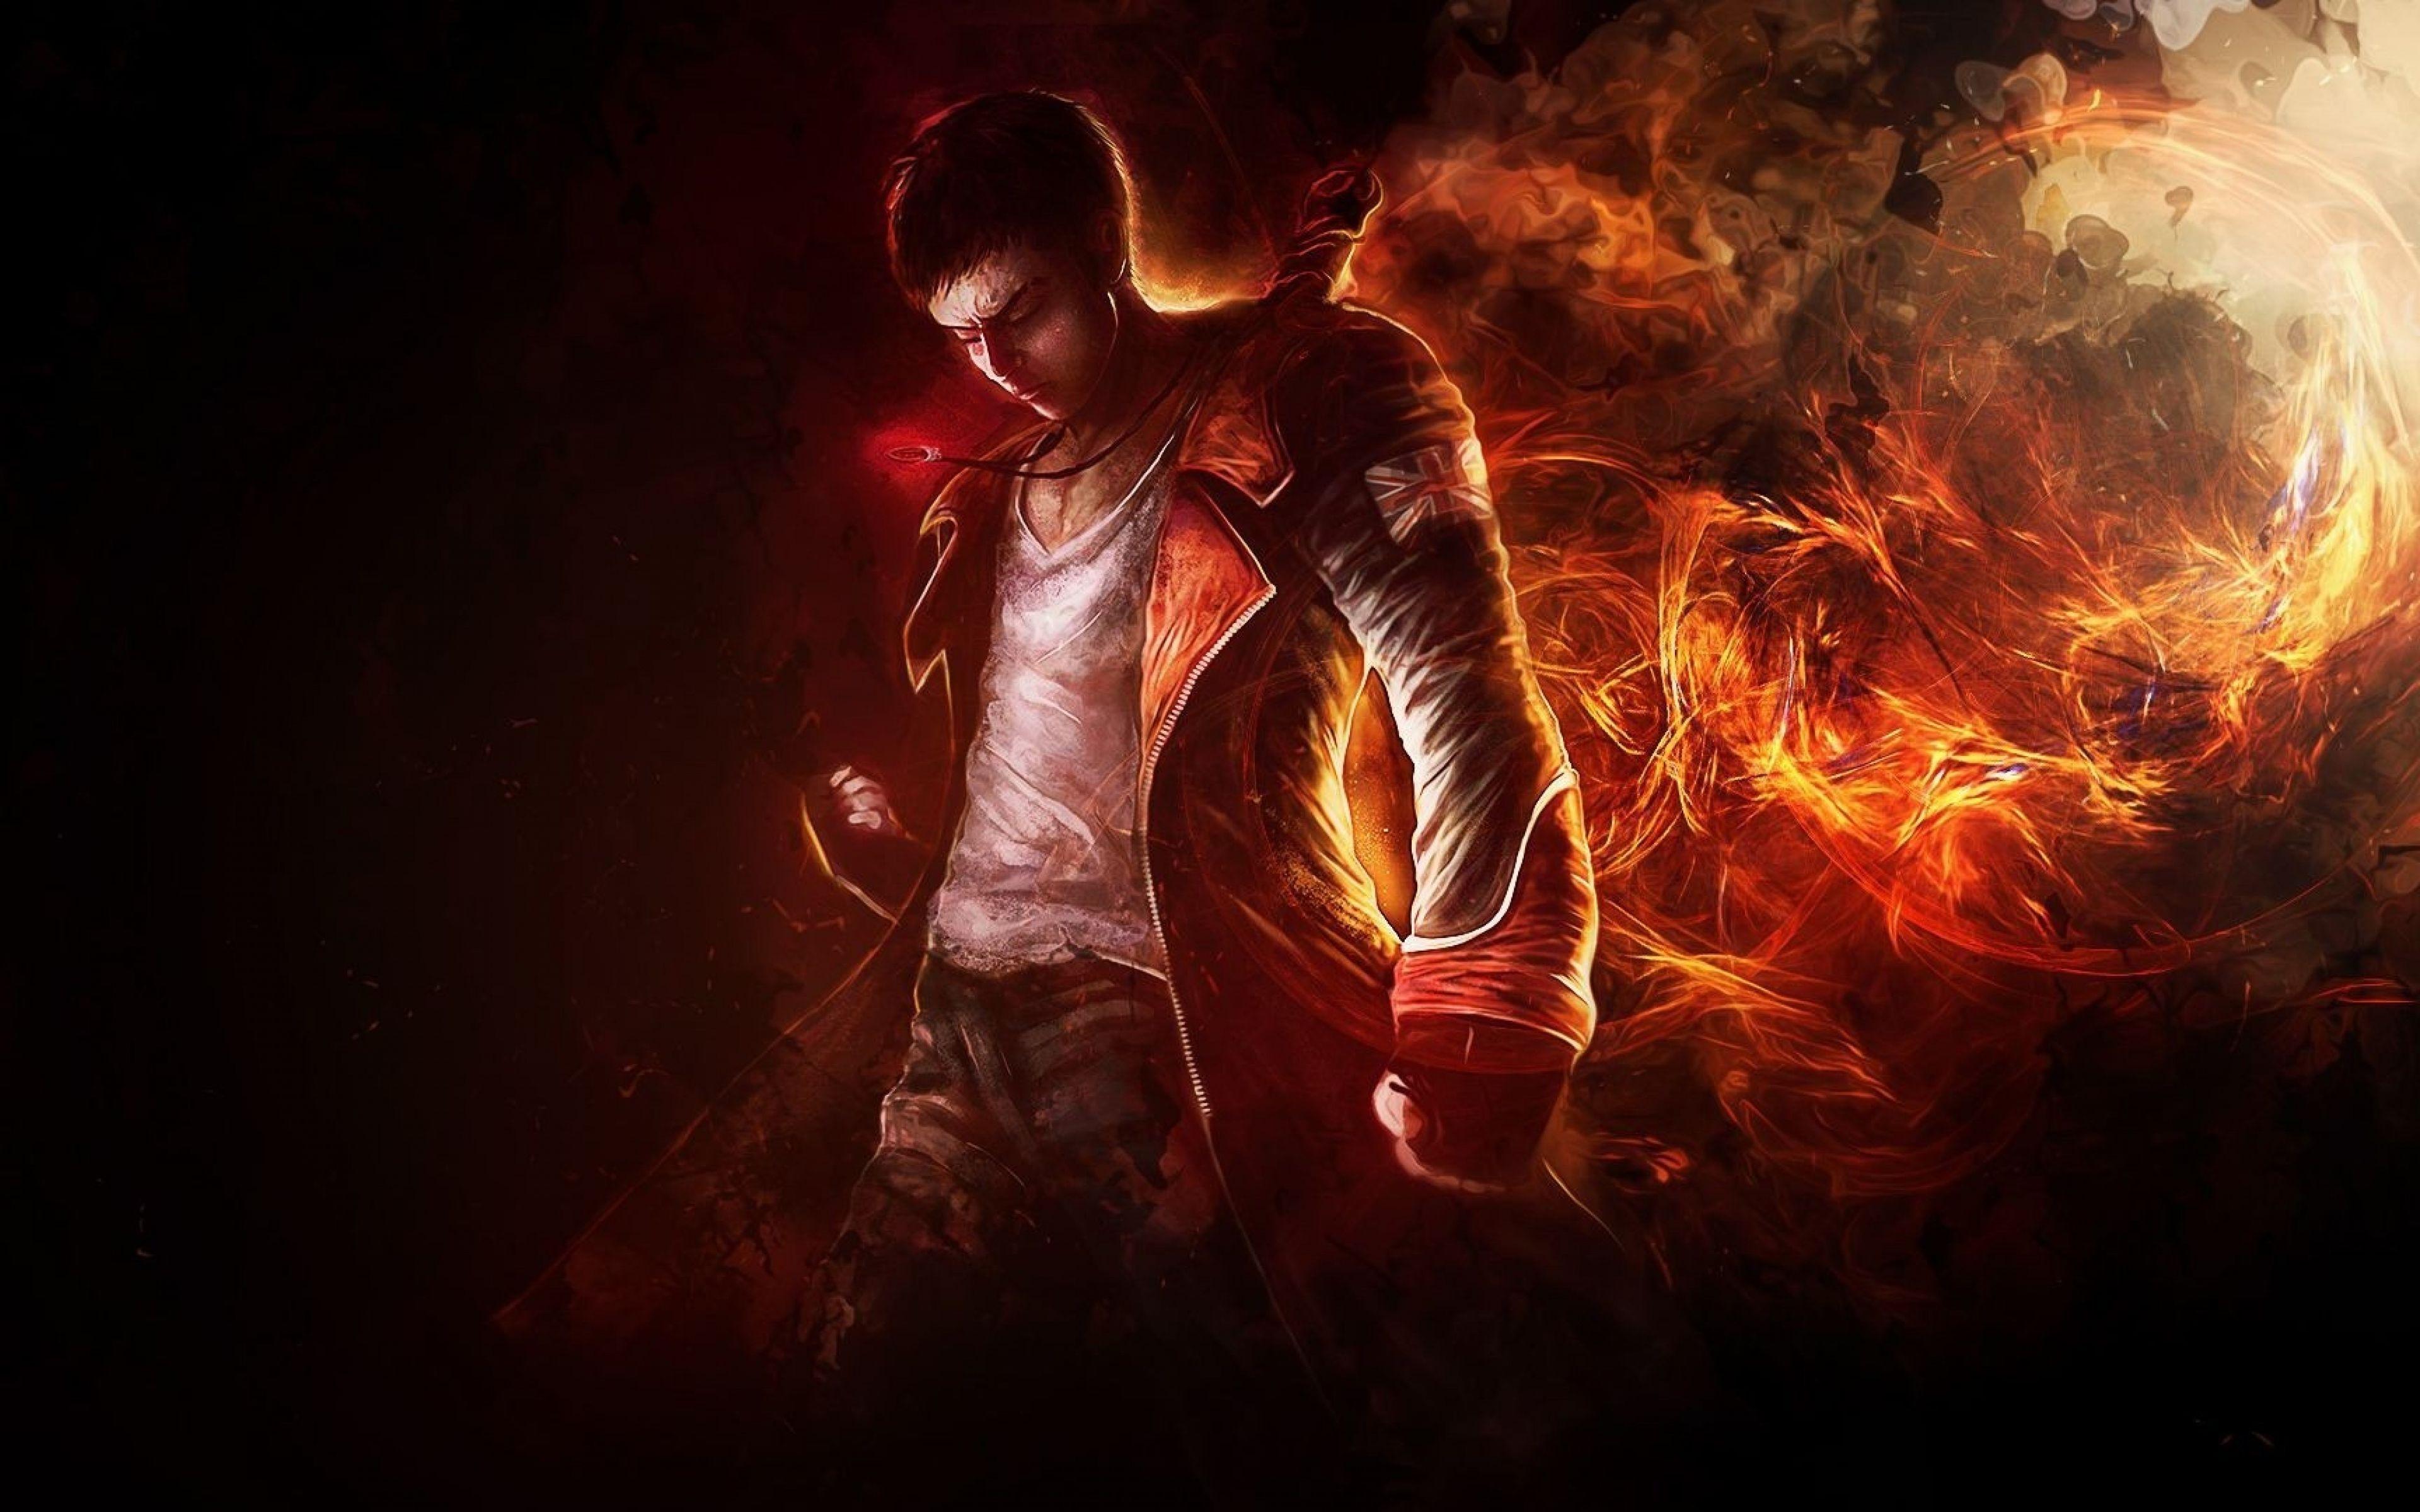 Devil May Cry HD Image Full Wallpaper High Quality Of Mobile